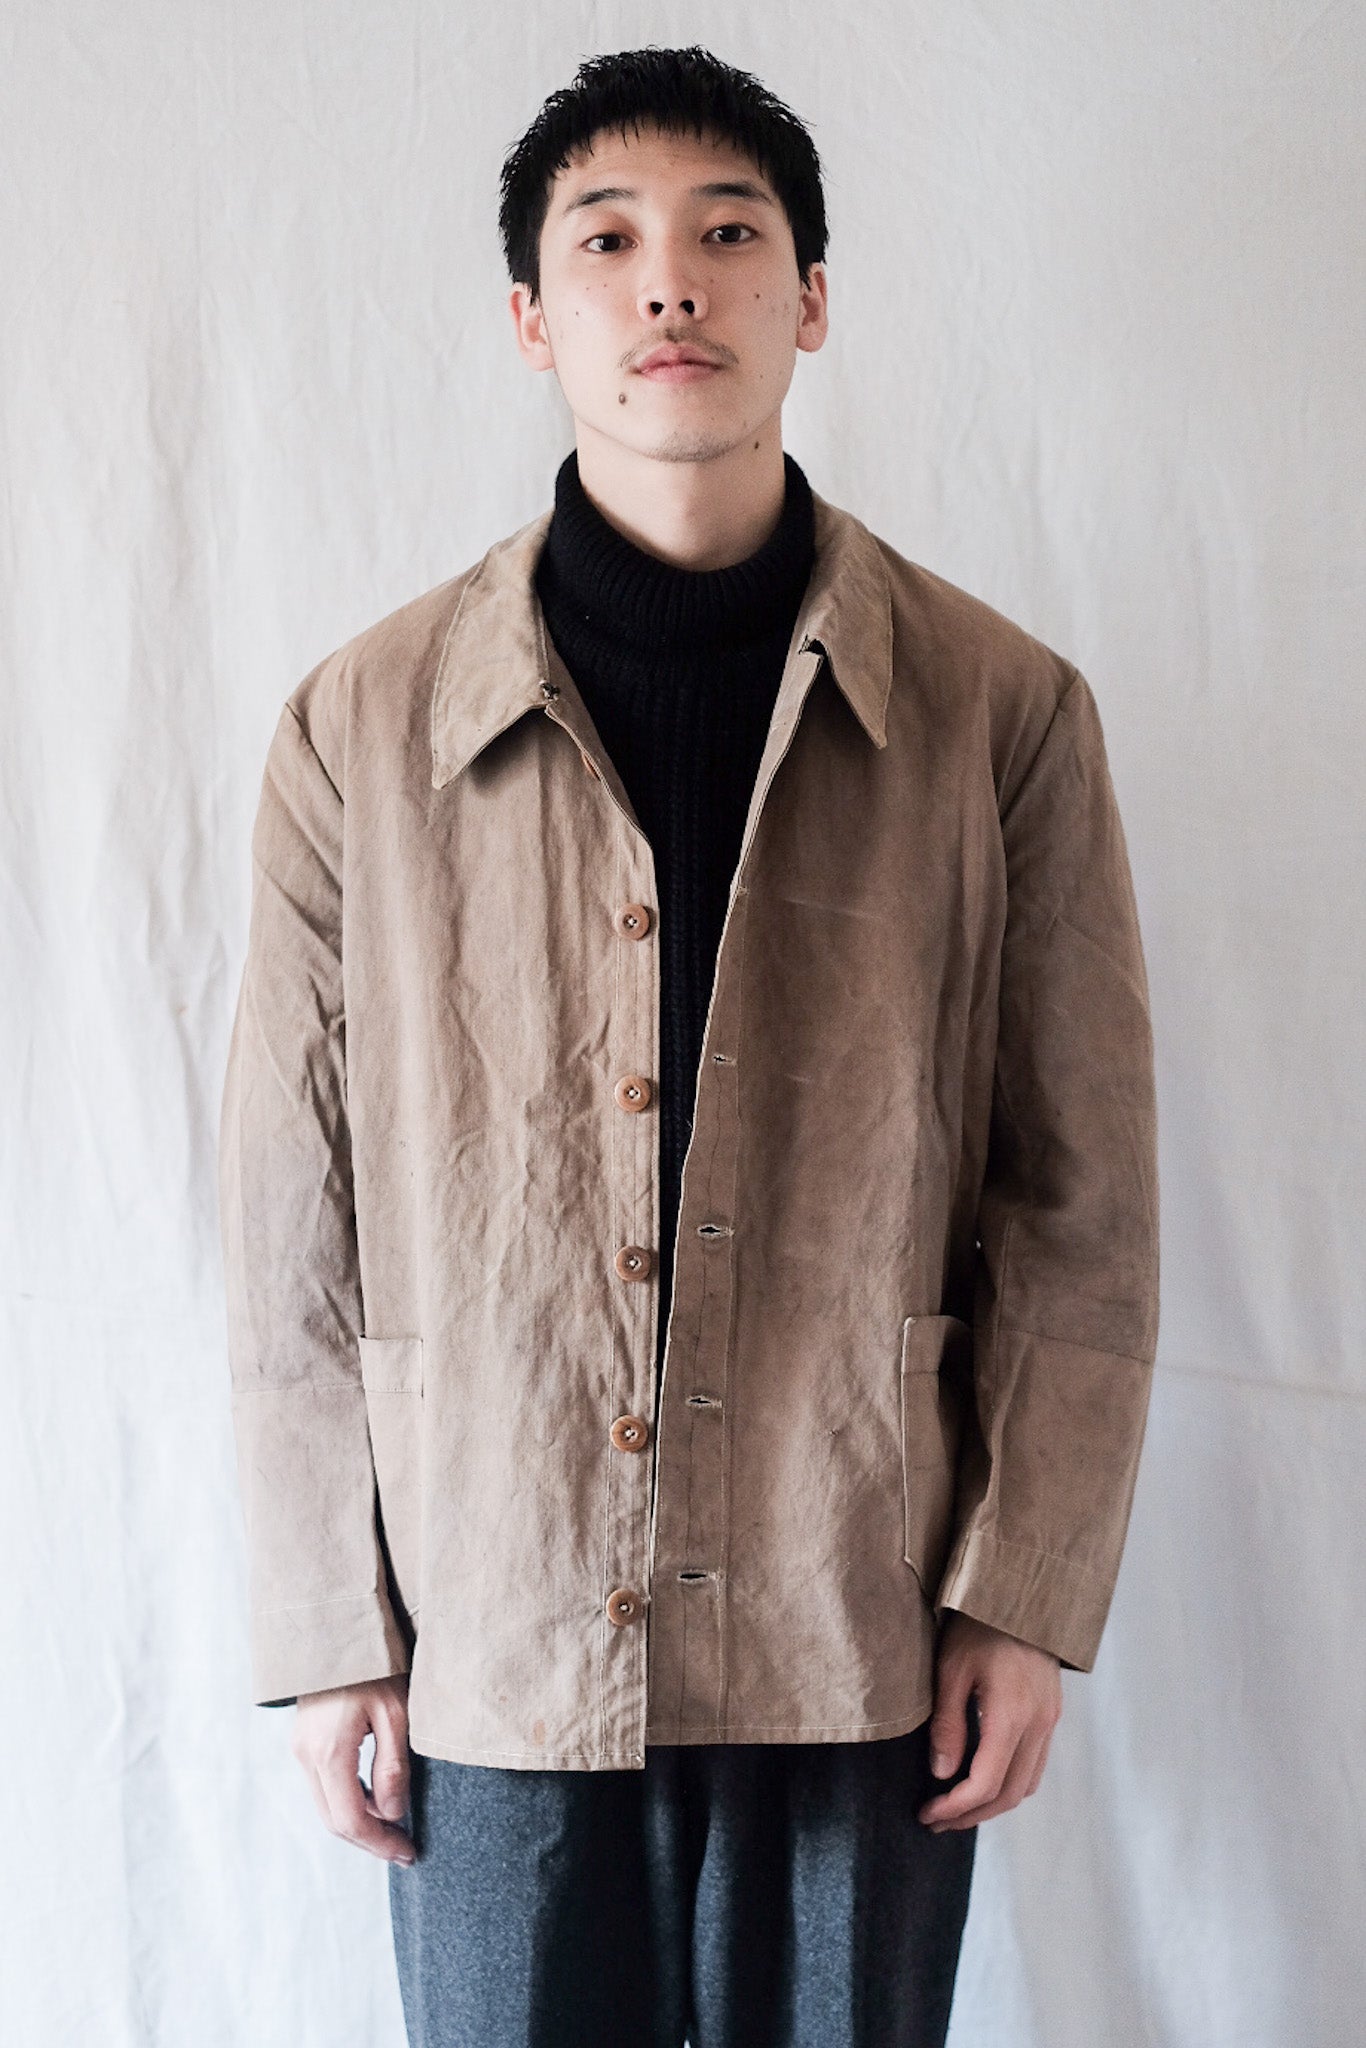 【~30's】French Vintage Cotton Linen Home Made Work Jacket